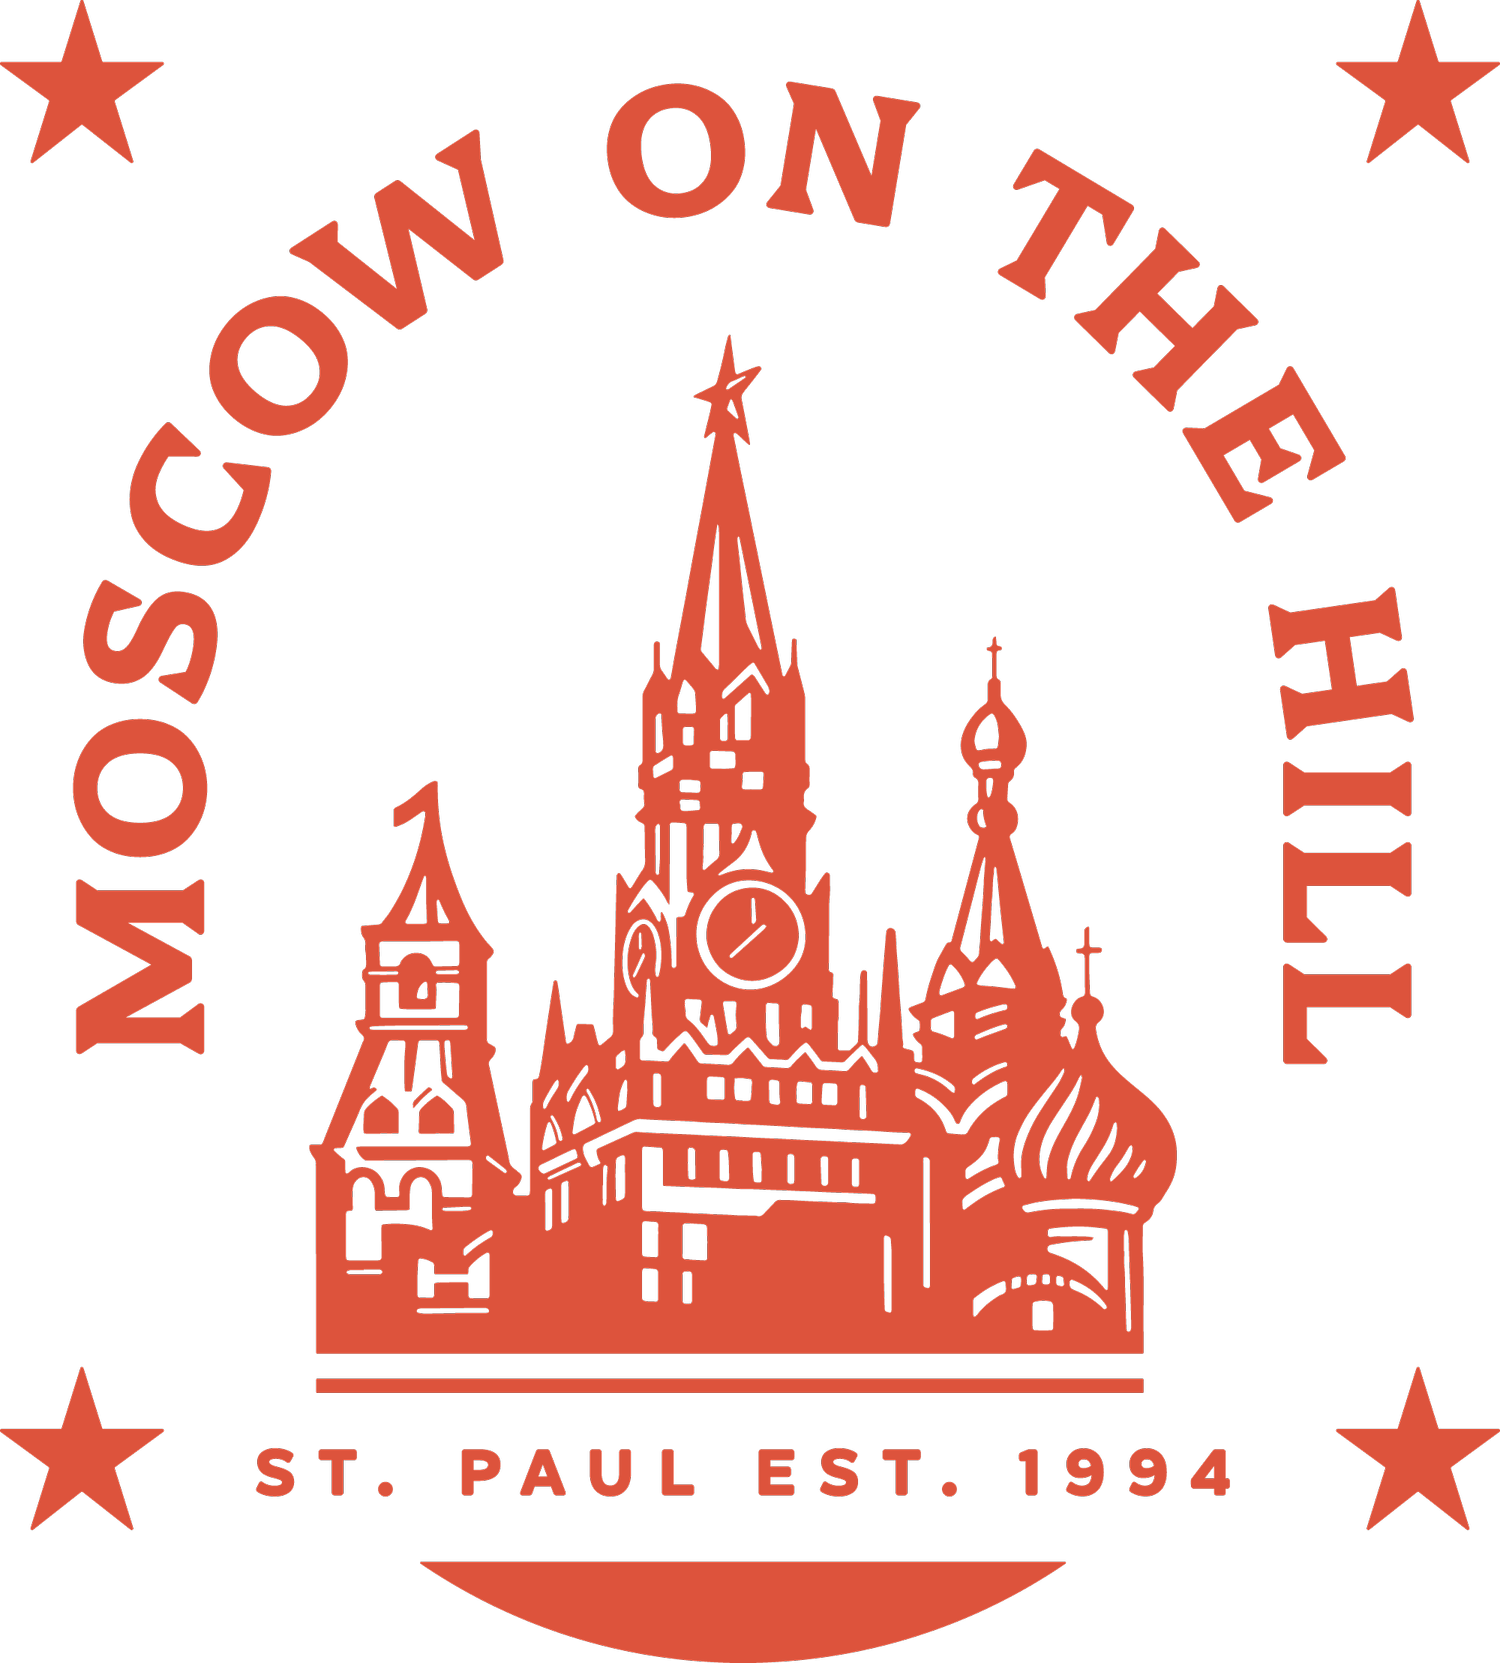 Moscow on the Hill